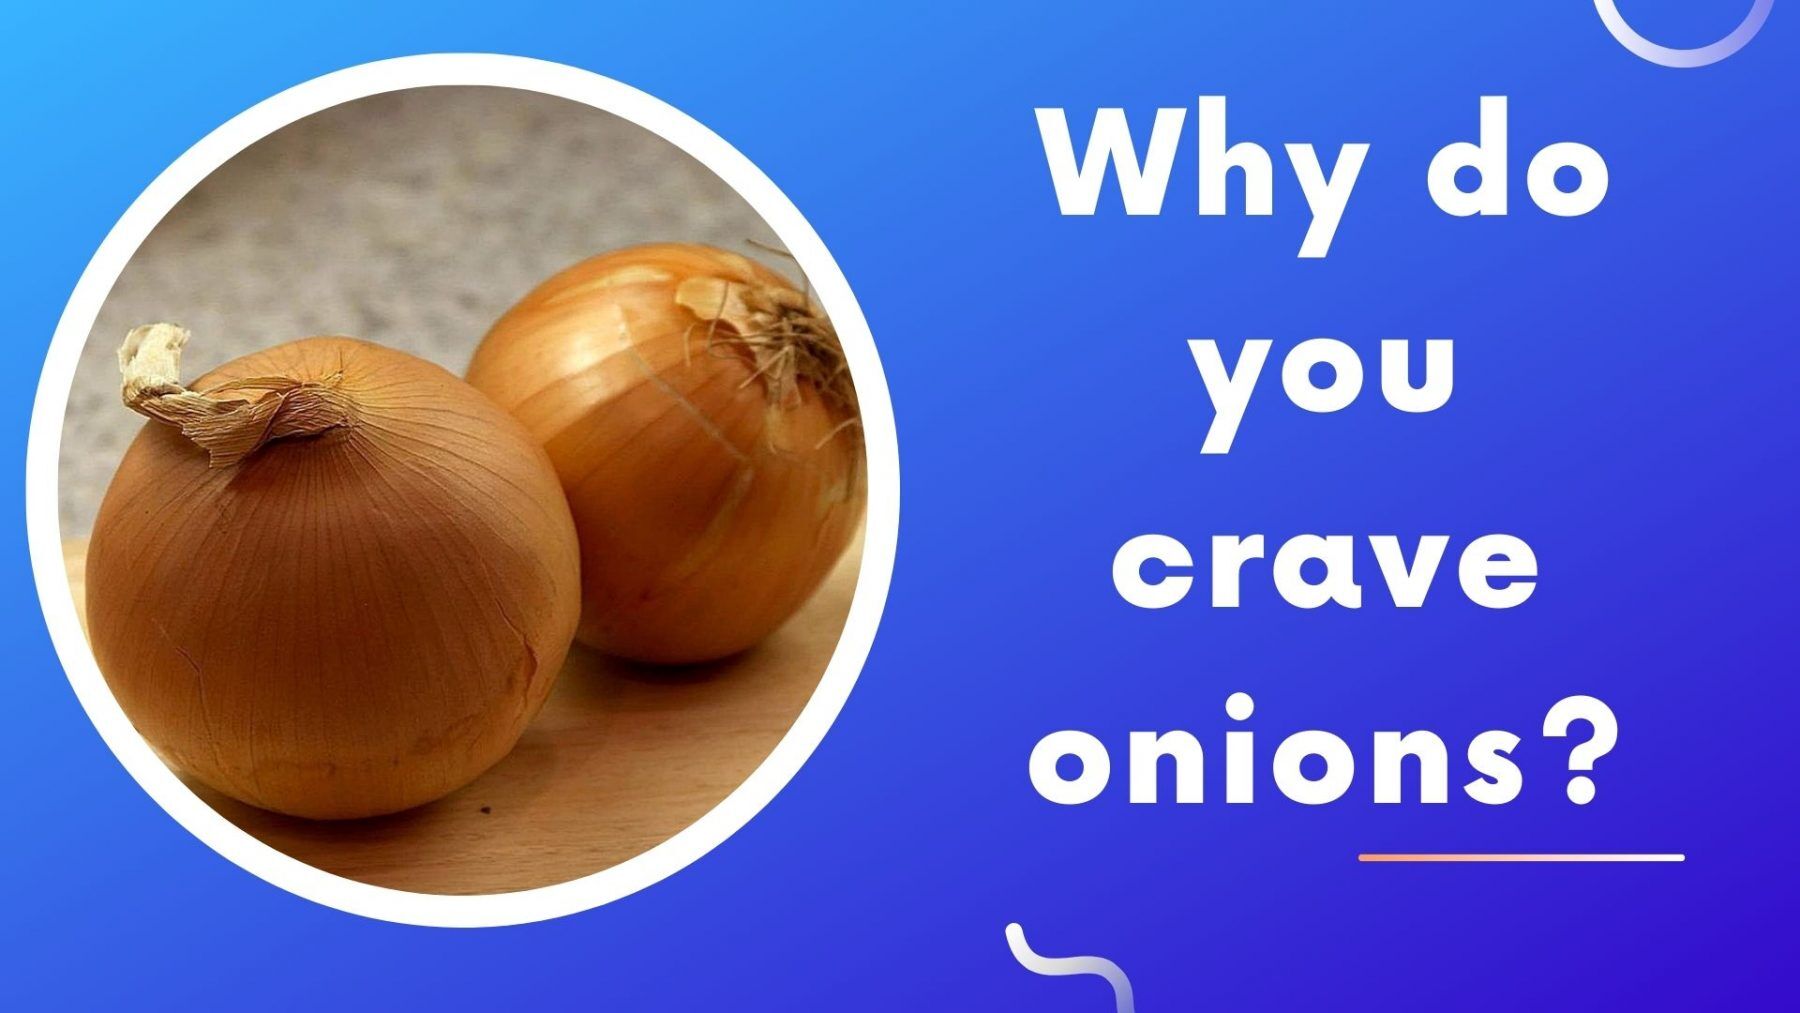 Why do I crave onions